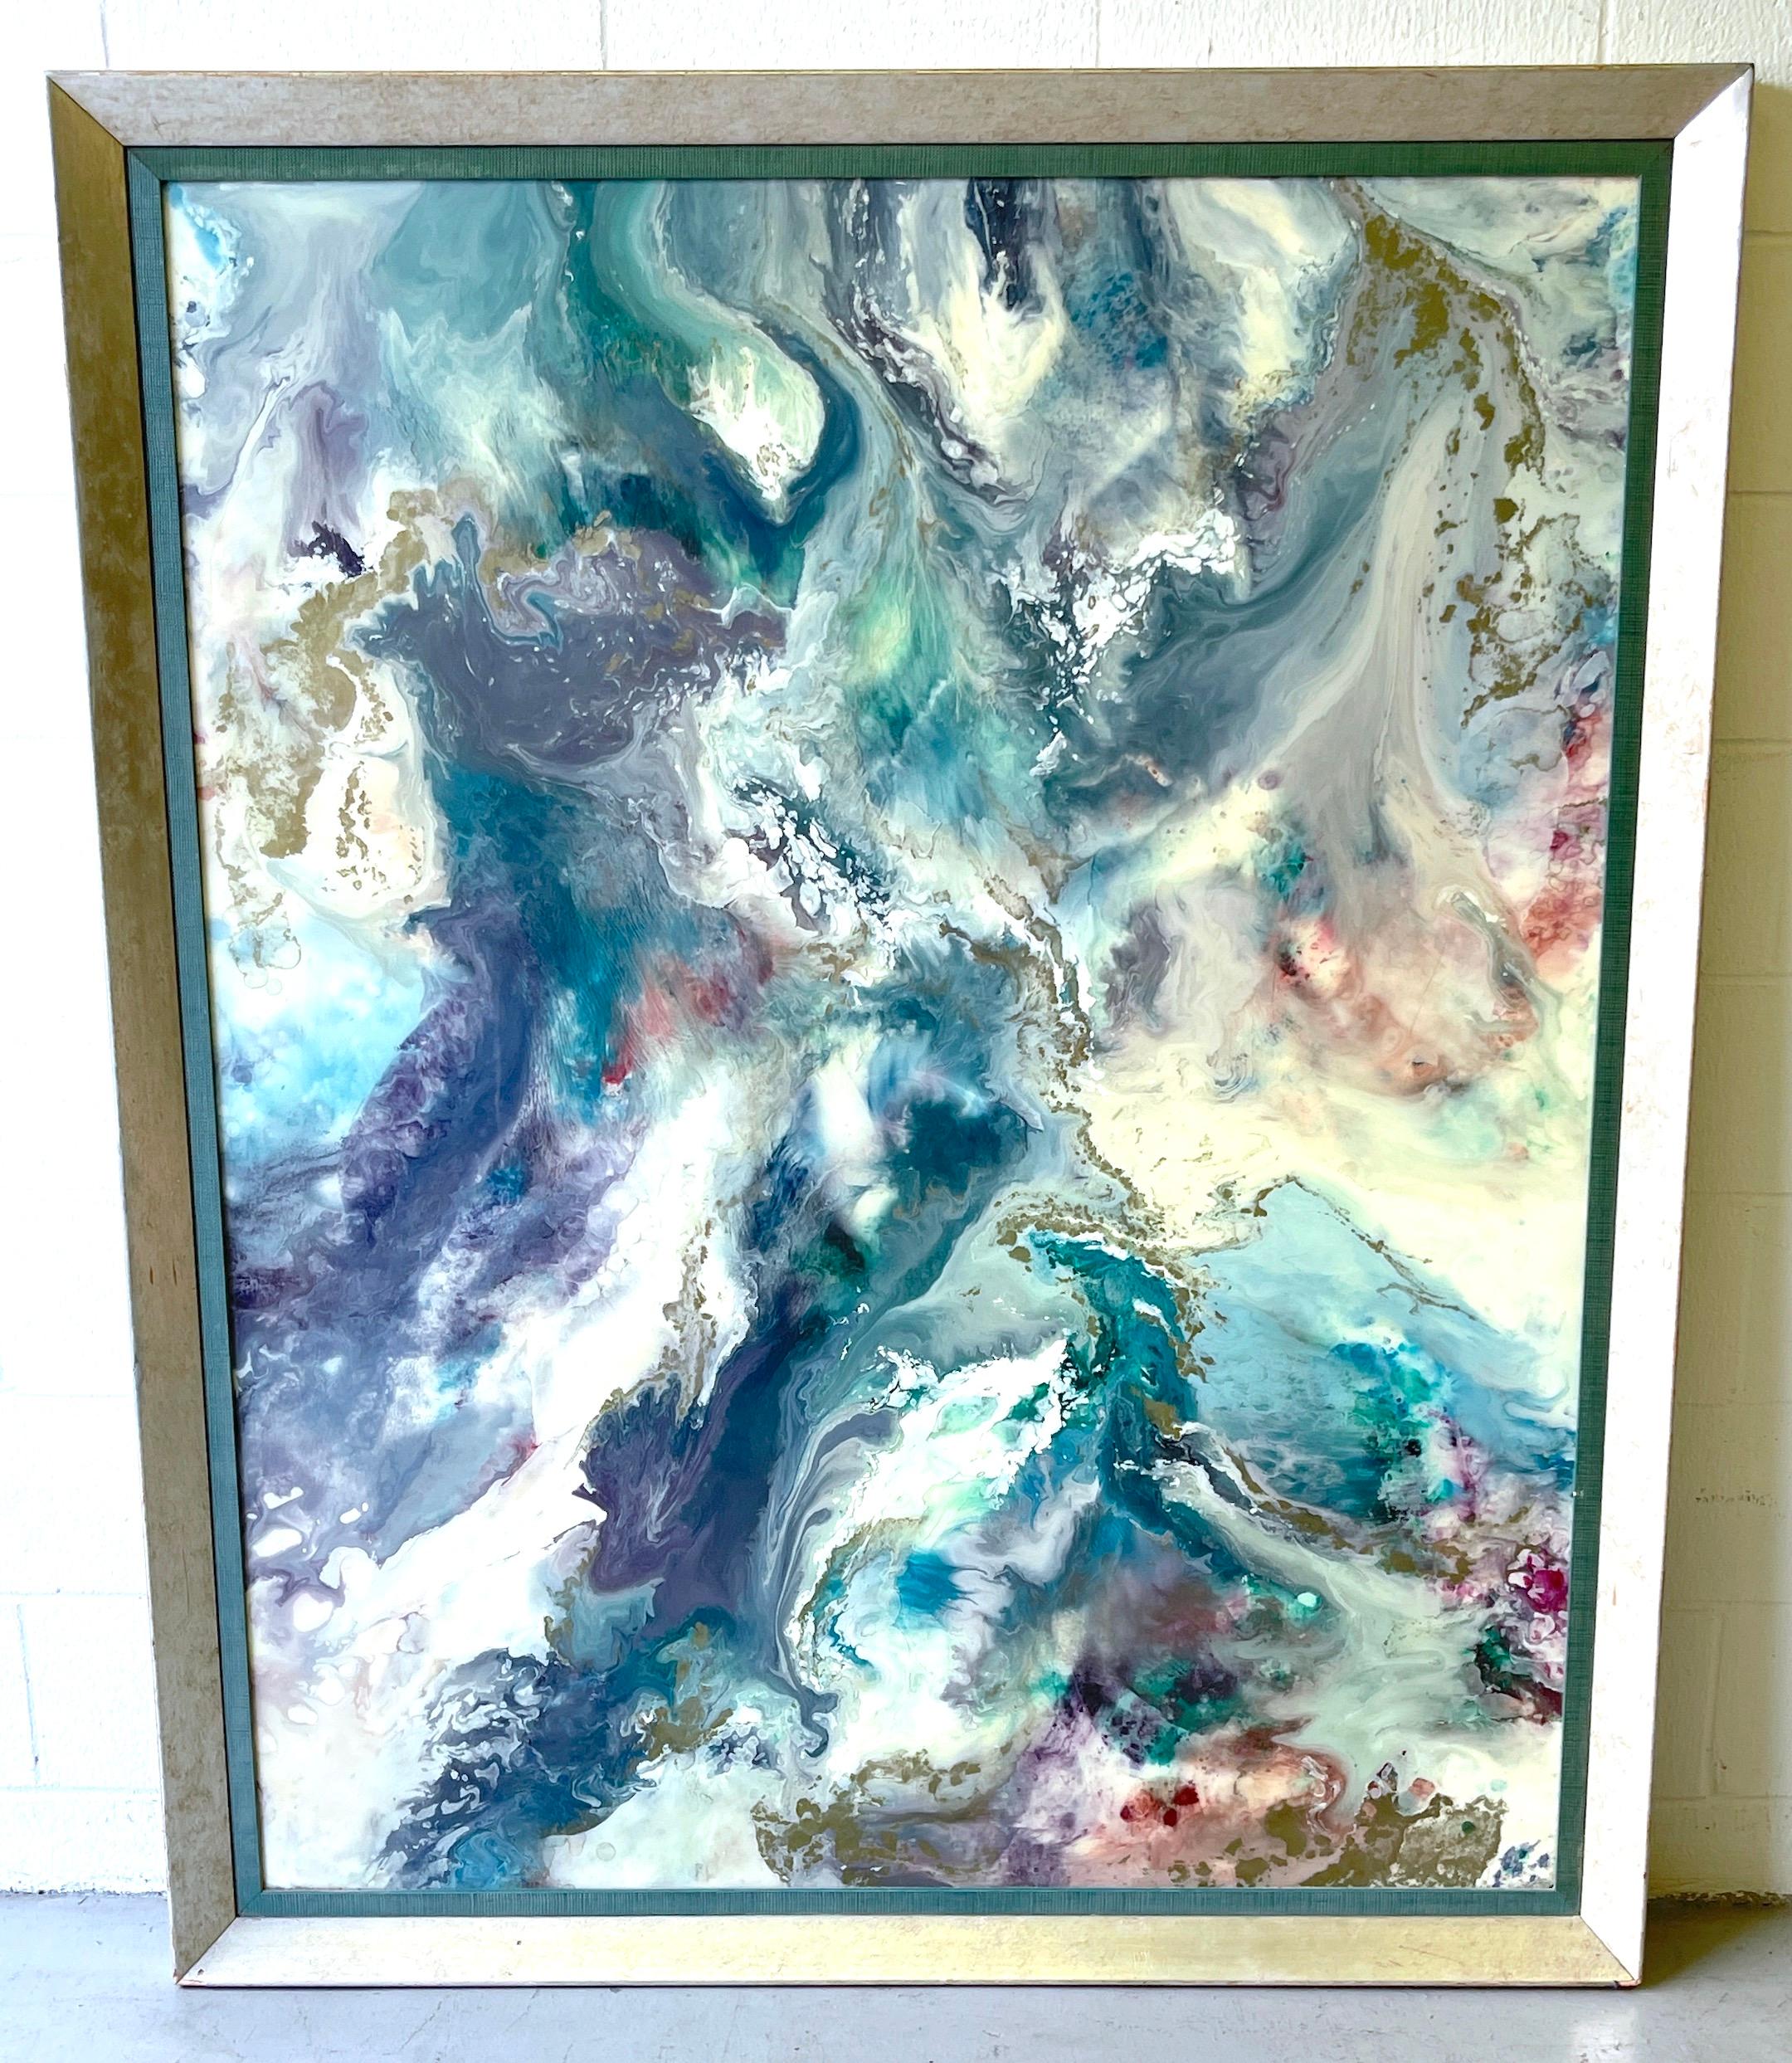 Monumental 'Oil Slick' Abstract Masterwork by Blakely Bering
BLAKELY BERING (American/Texas 21st Century) 
USA, Circa 2006, Frame, Imported from Italy by Larsen-Juhl

Experience the grandeur of artistic innovation with this massive abstract painting